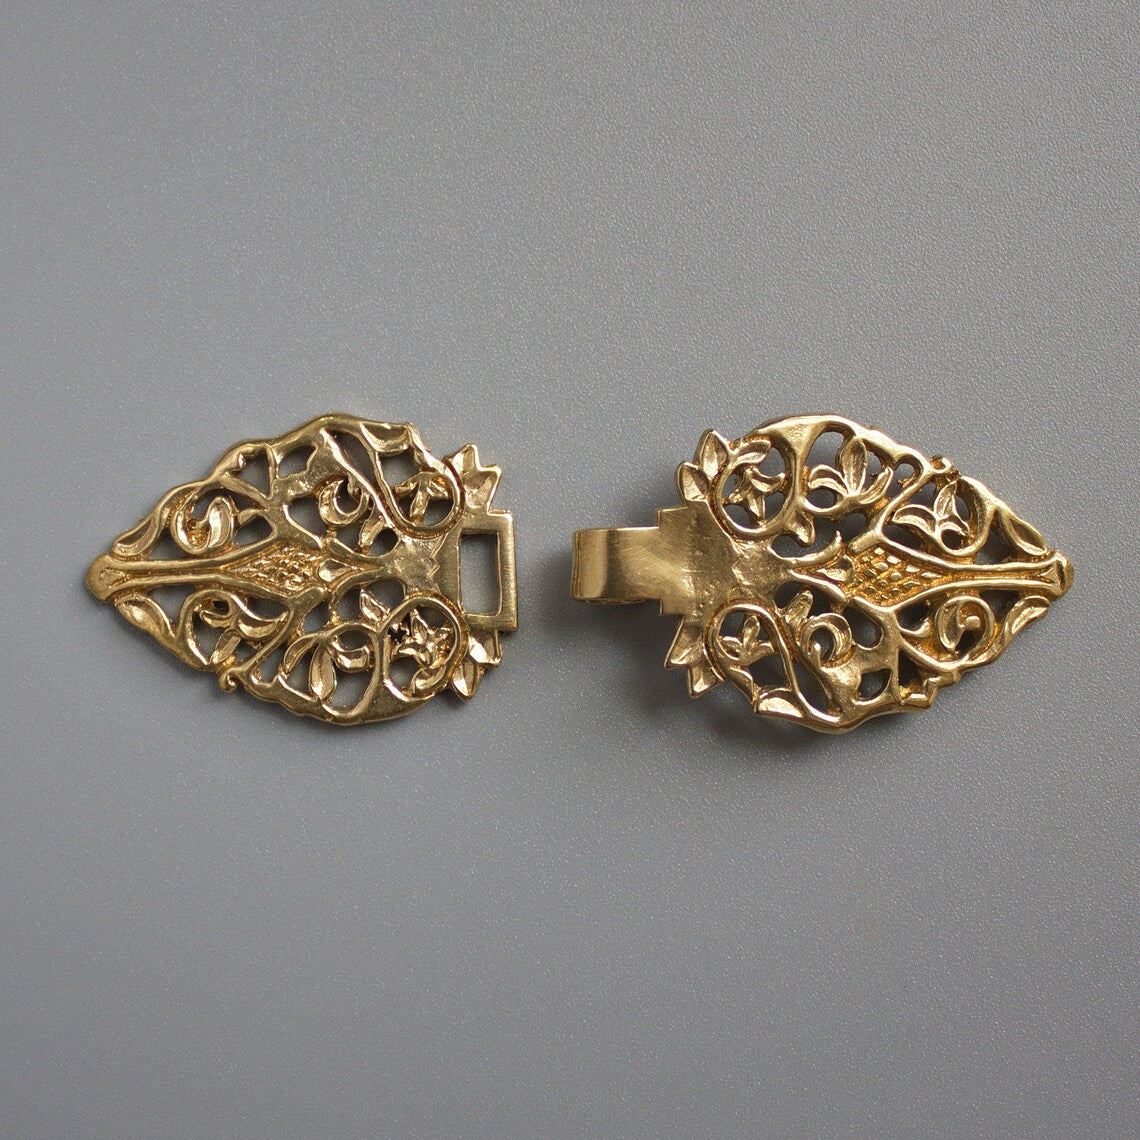 Renaissance Cloak Clasp with Vines and Leaves